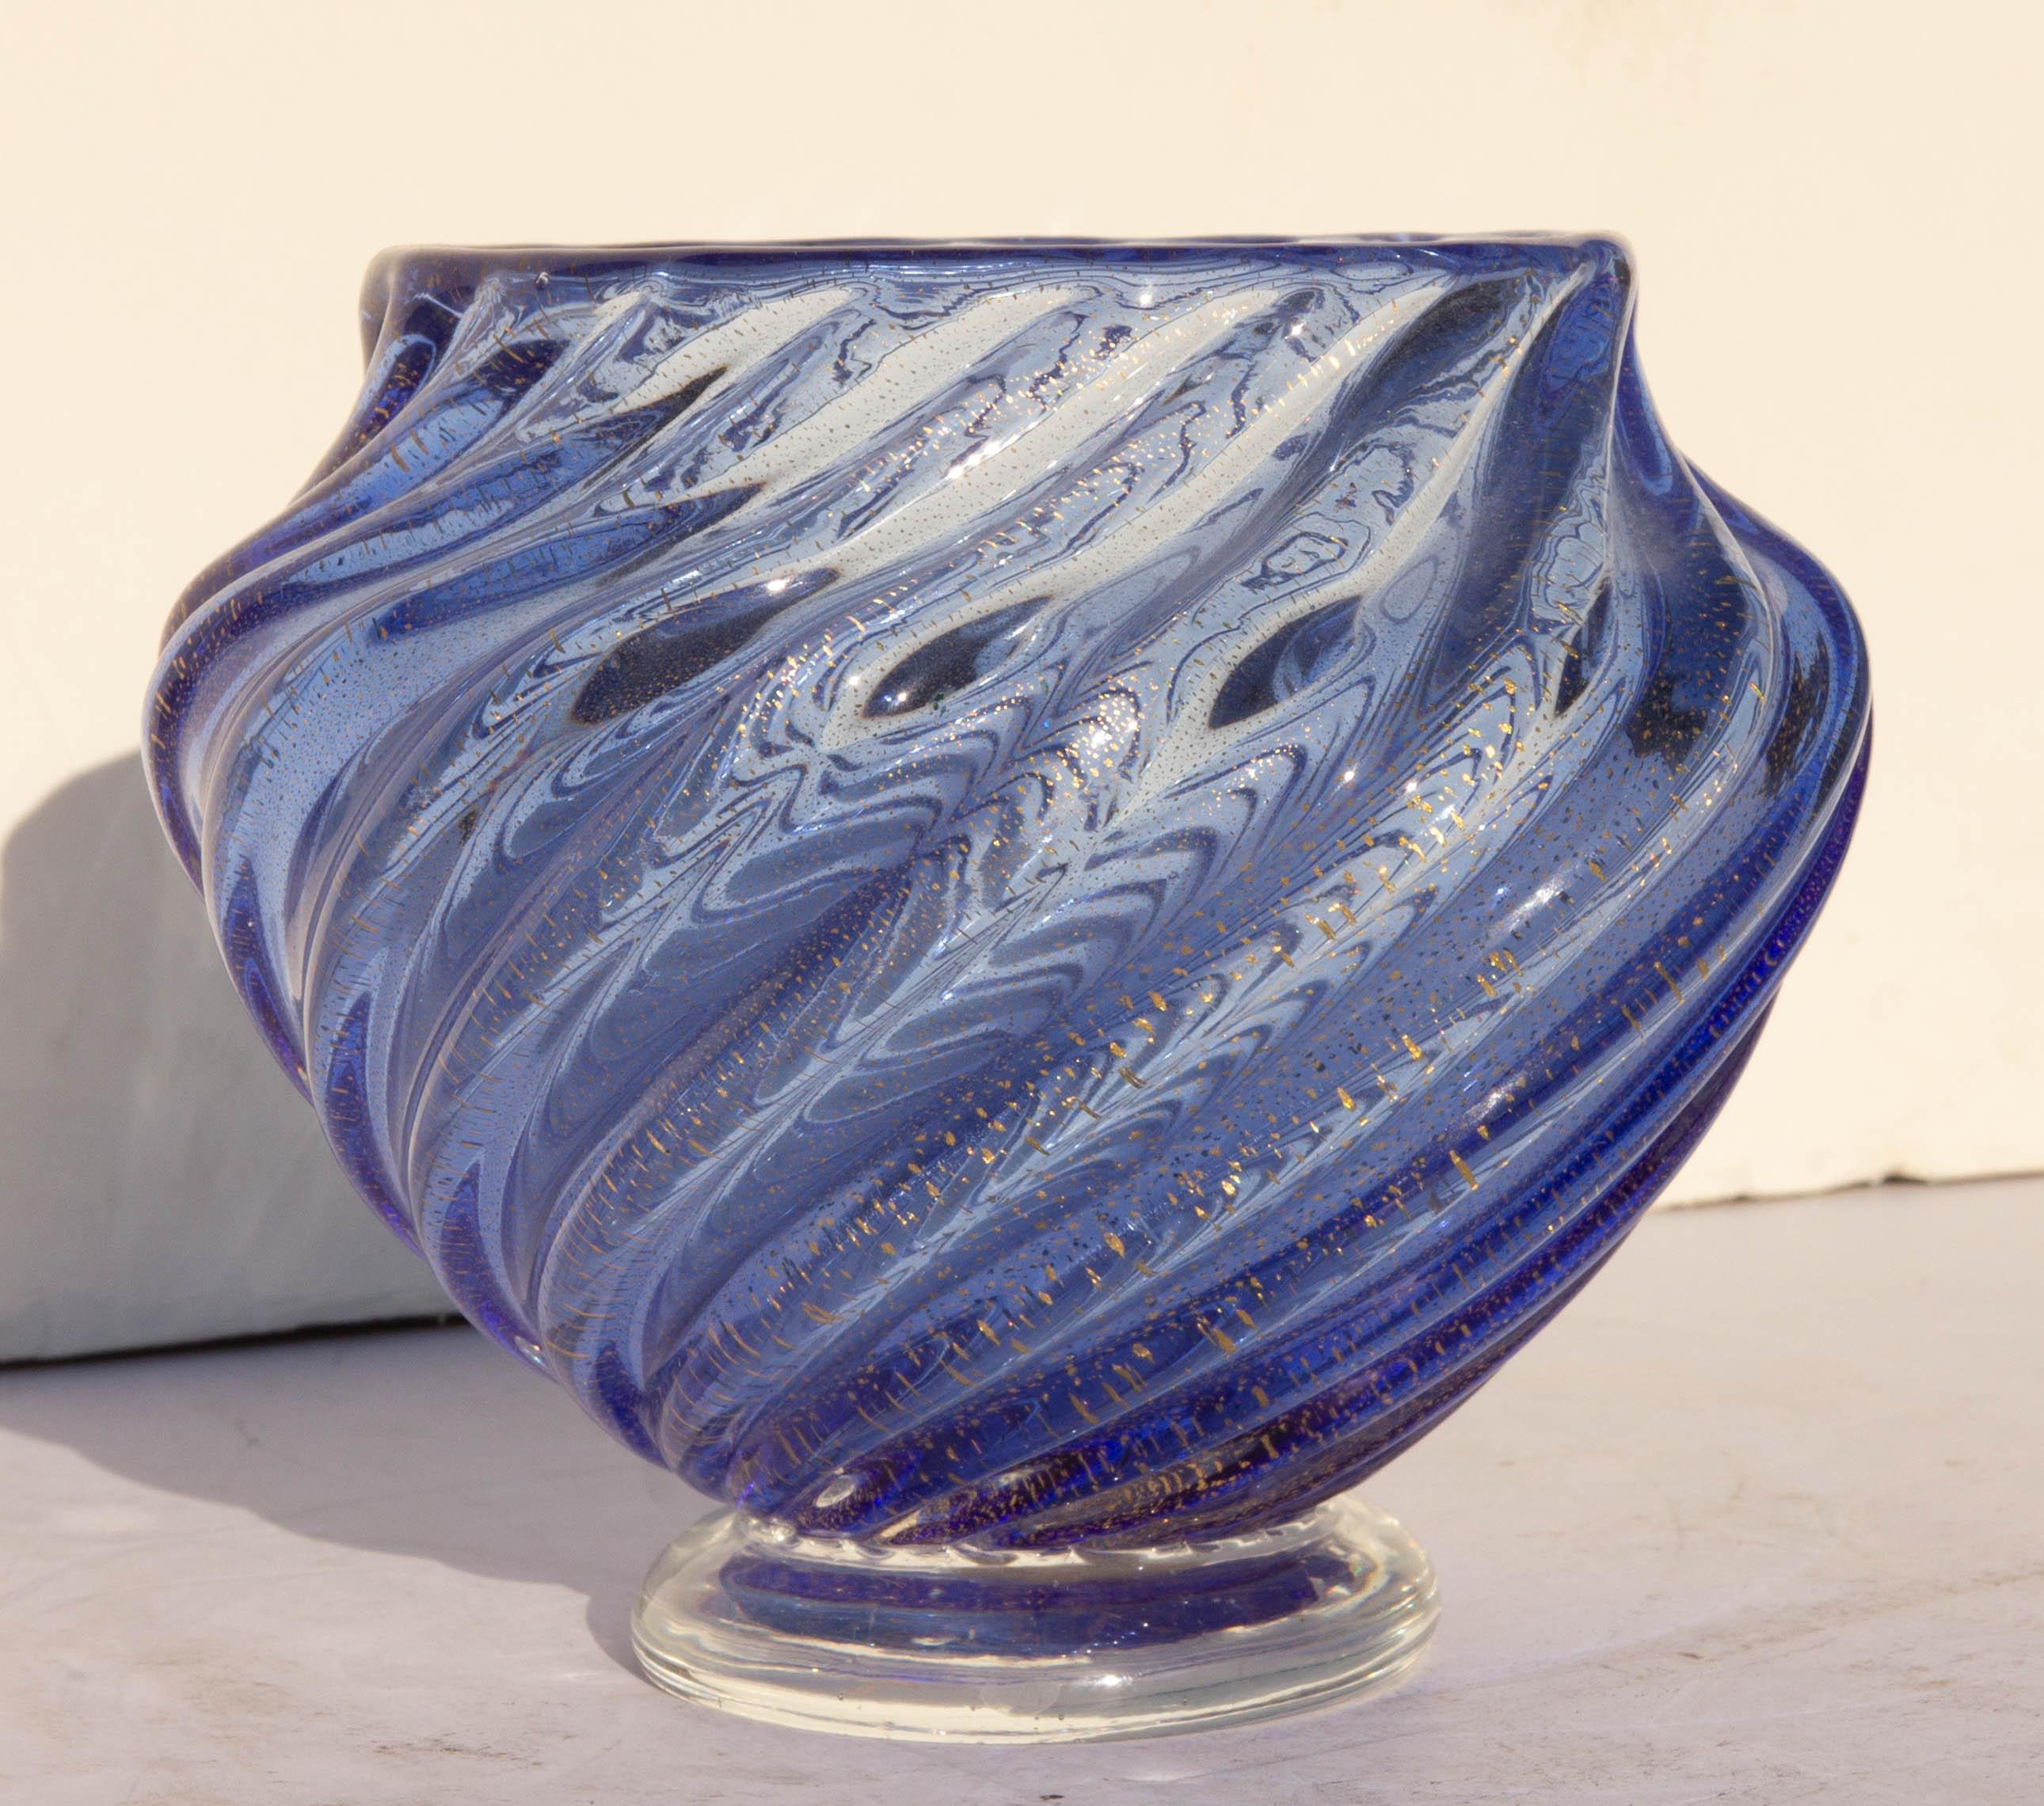 Vintage Venetian glass swirled vase. Blue, and clear glass with gold flecks. Original Murano label on bottom, mid-20th century.